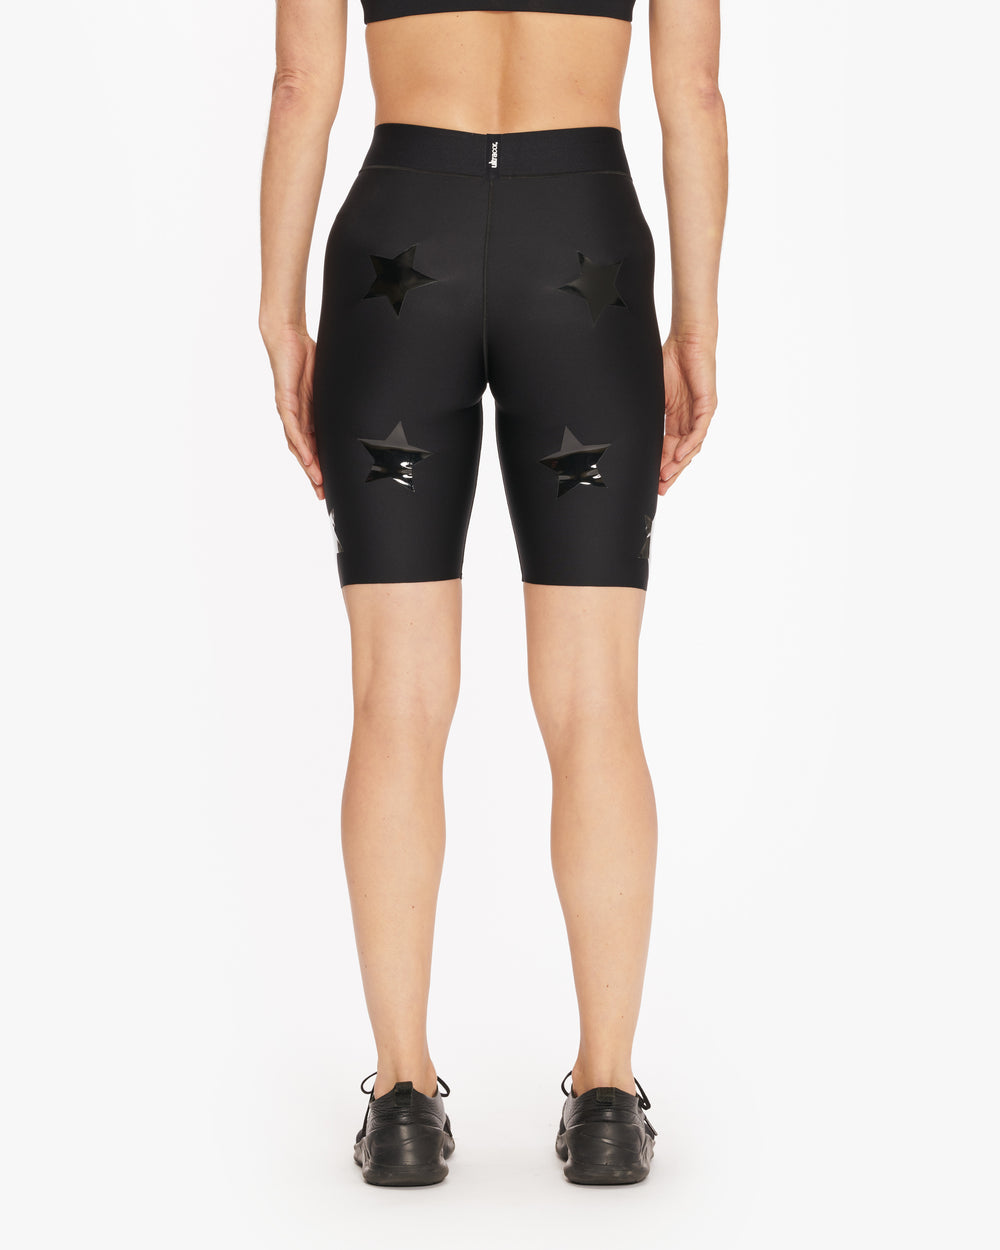 ULTRACOR AERO LUX KNOCKOUT SHORT